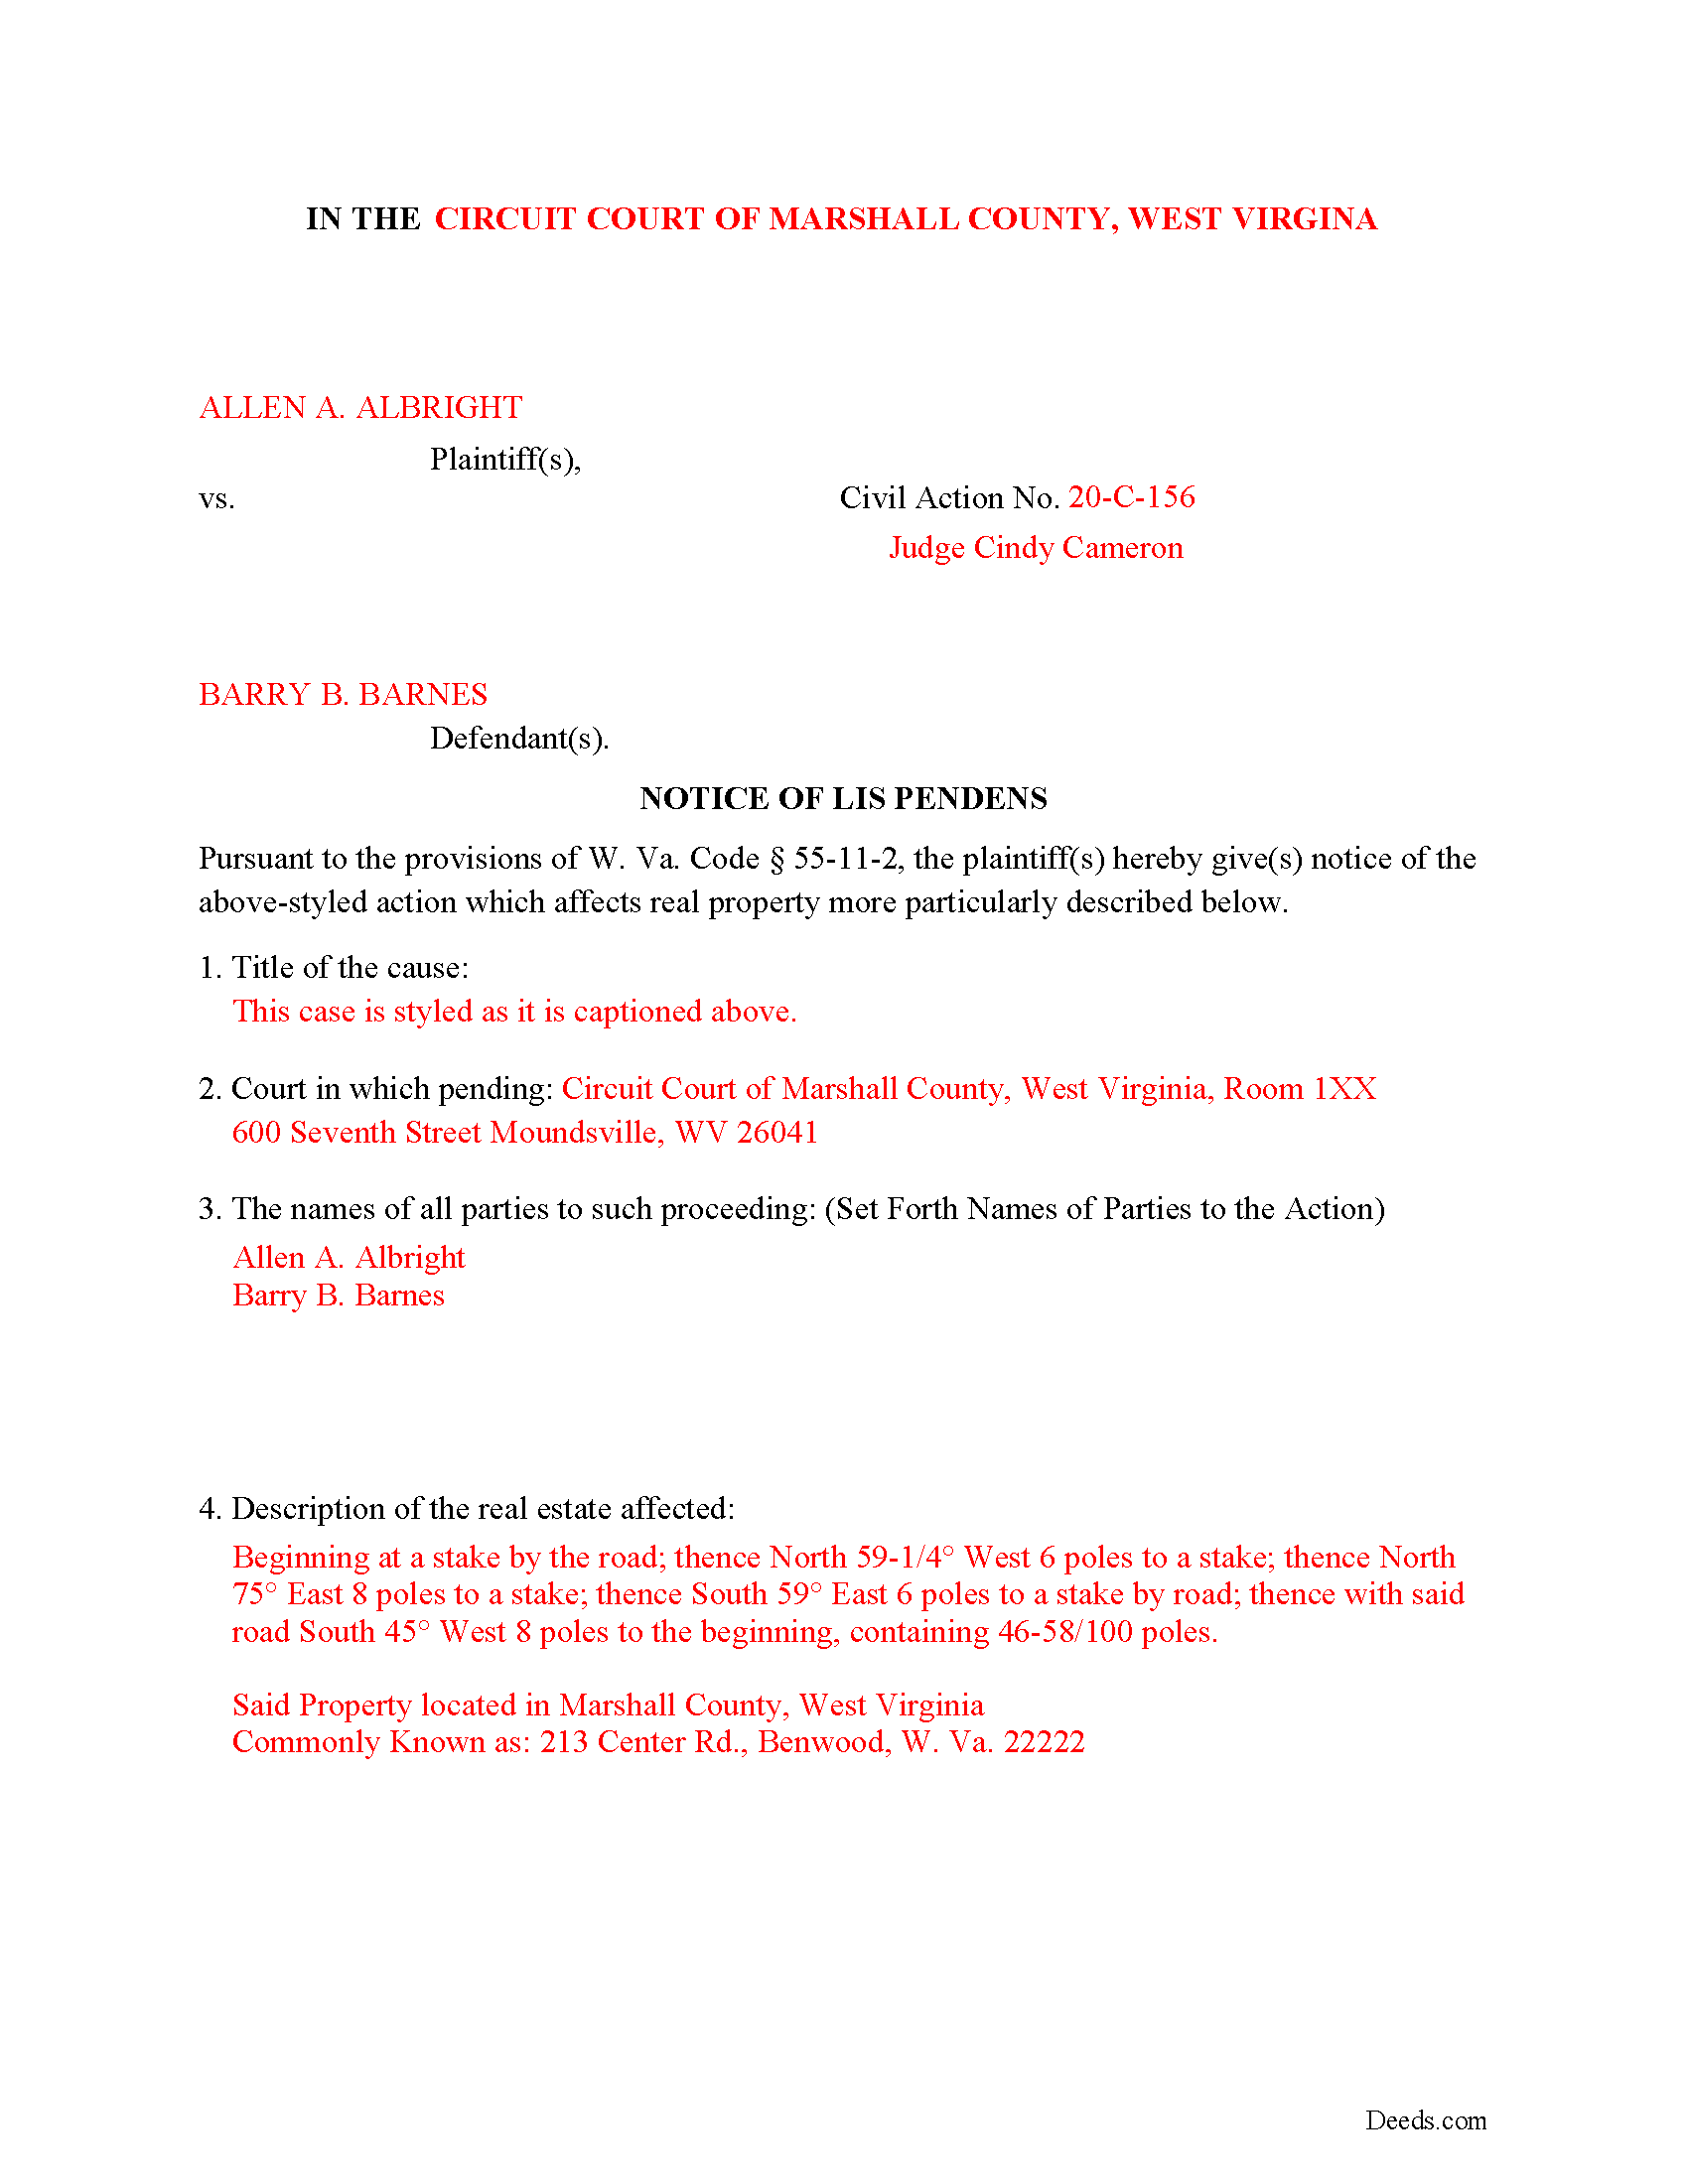 Completed Example of the Lis Pendens Document